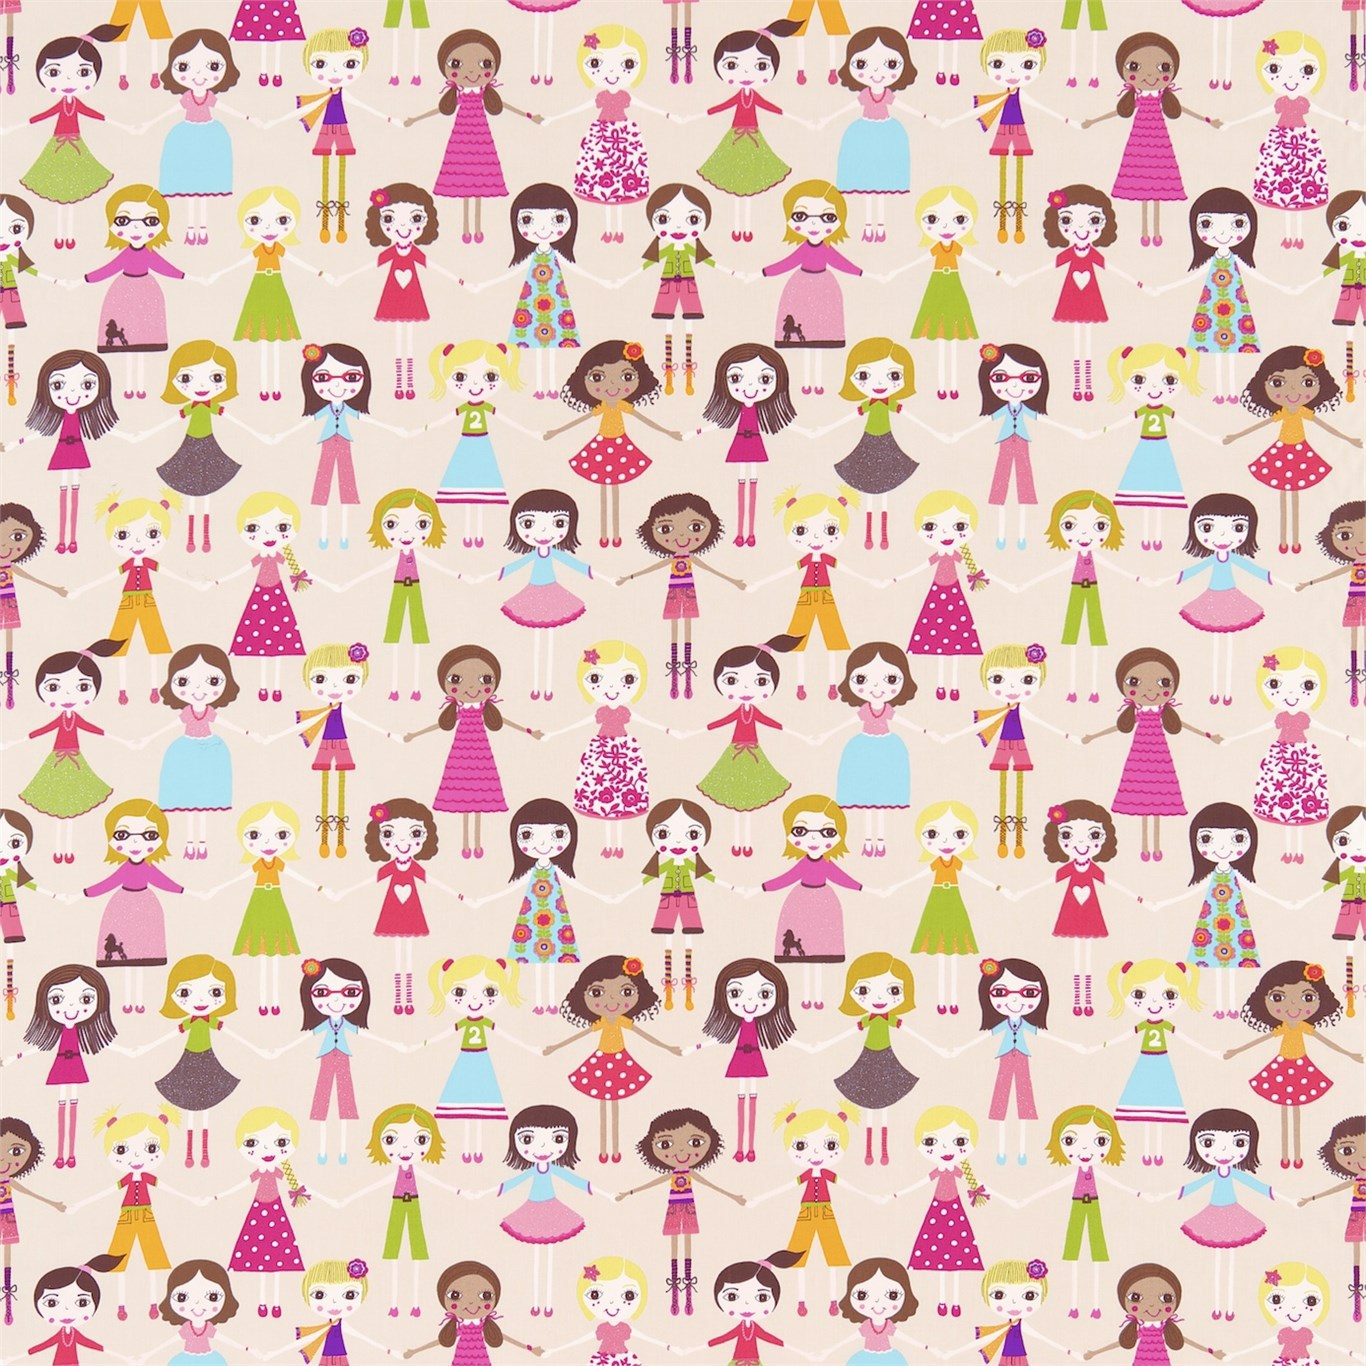 Best Of Friends Fabric by Harlequin - HKID120218 - Neutral Multi